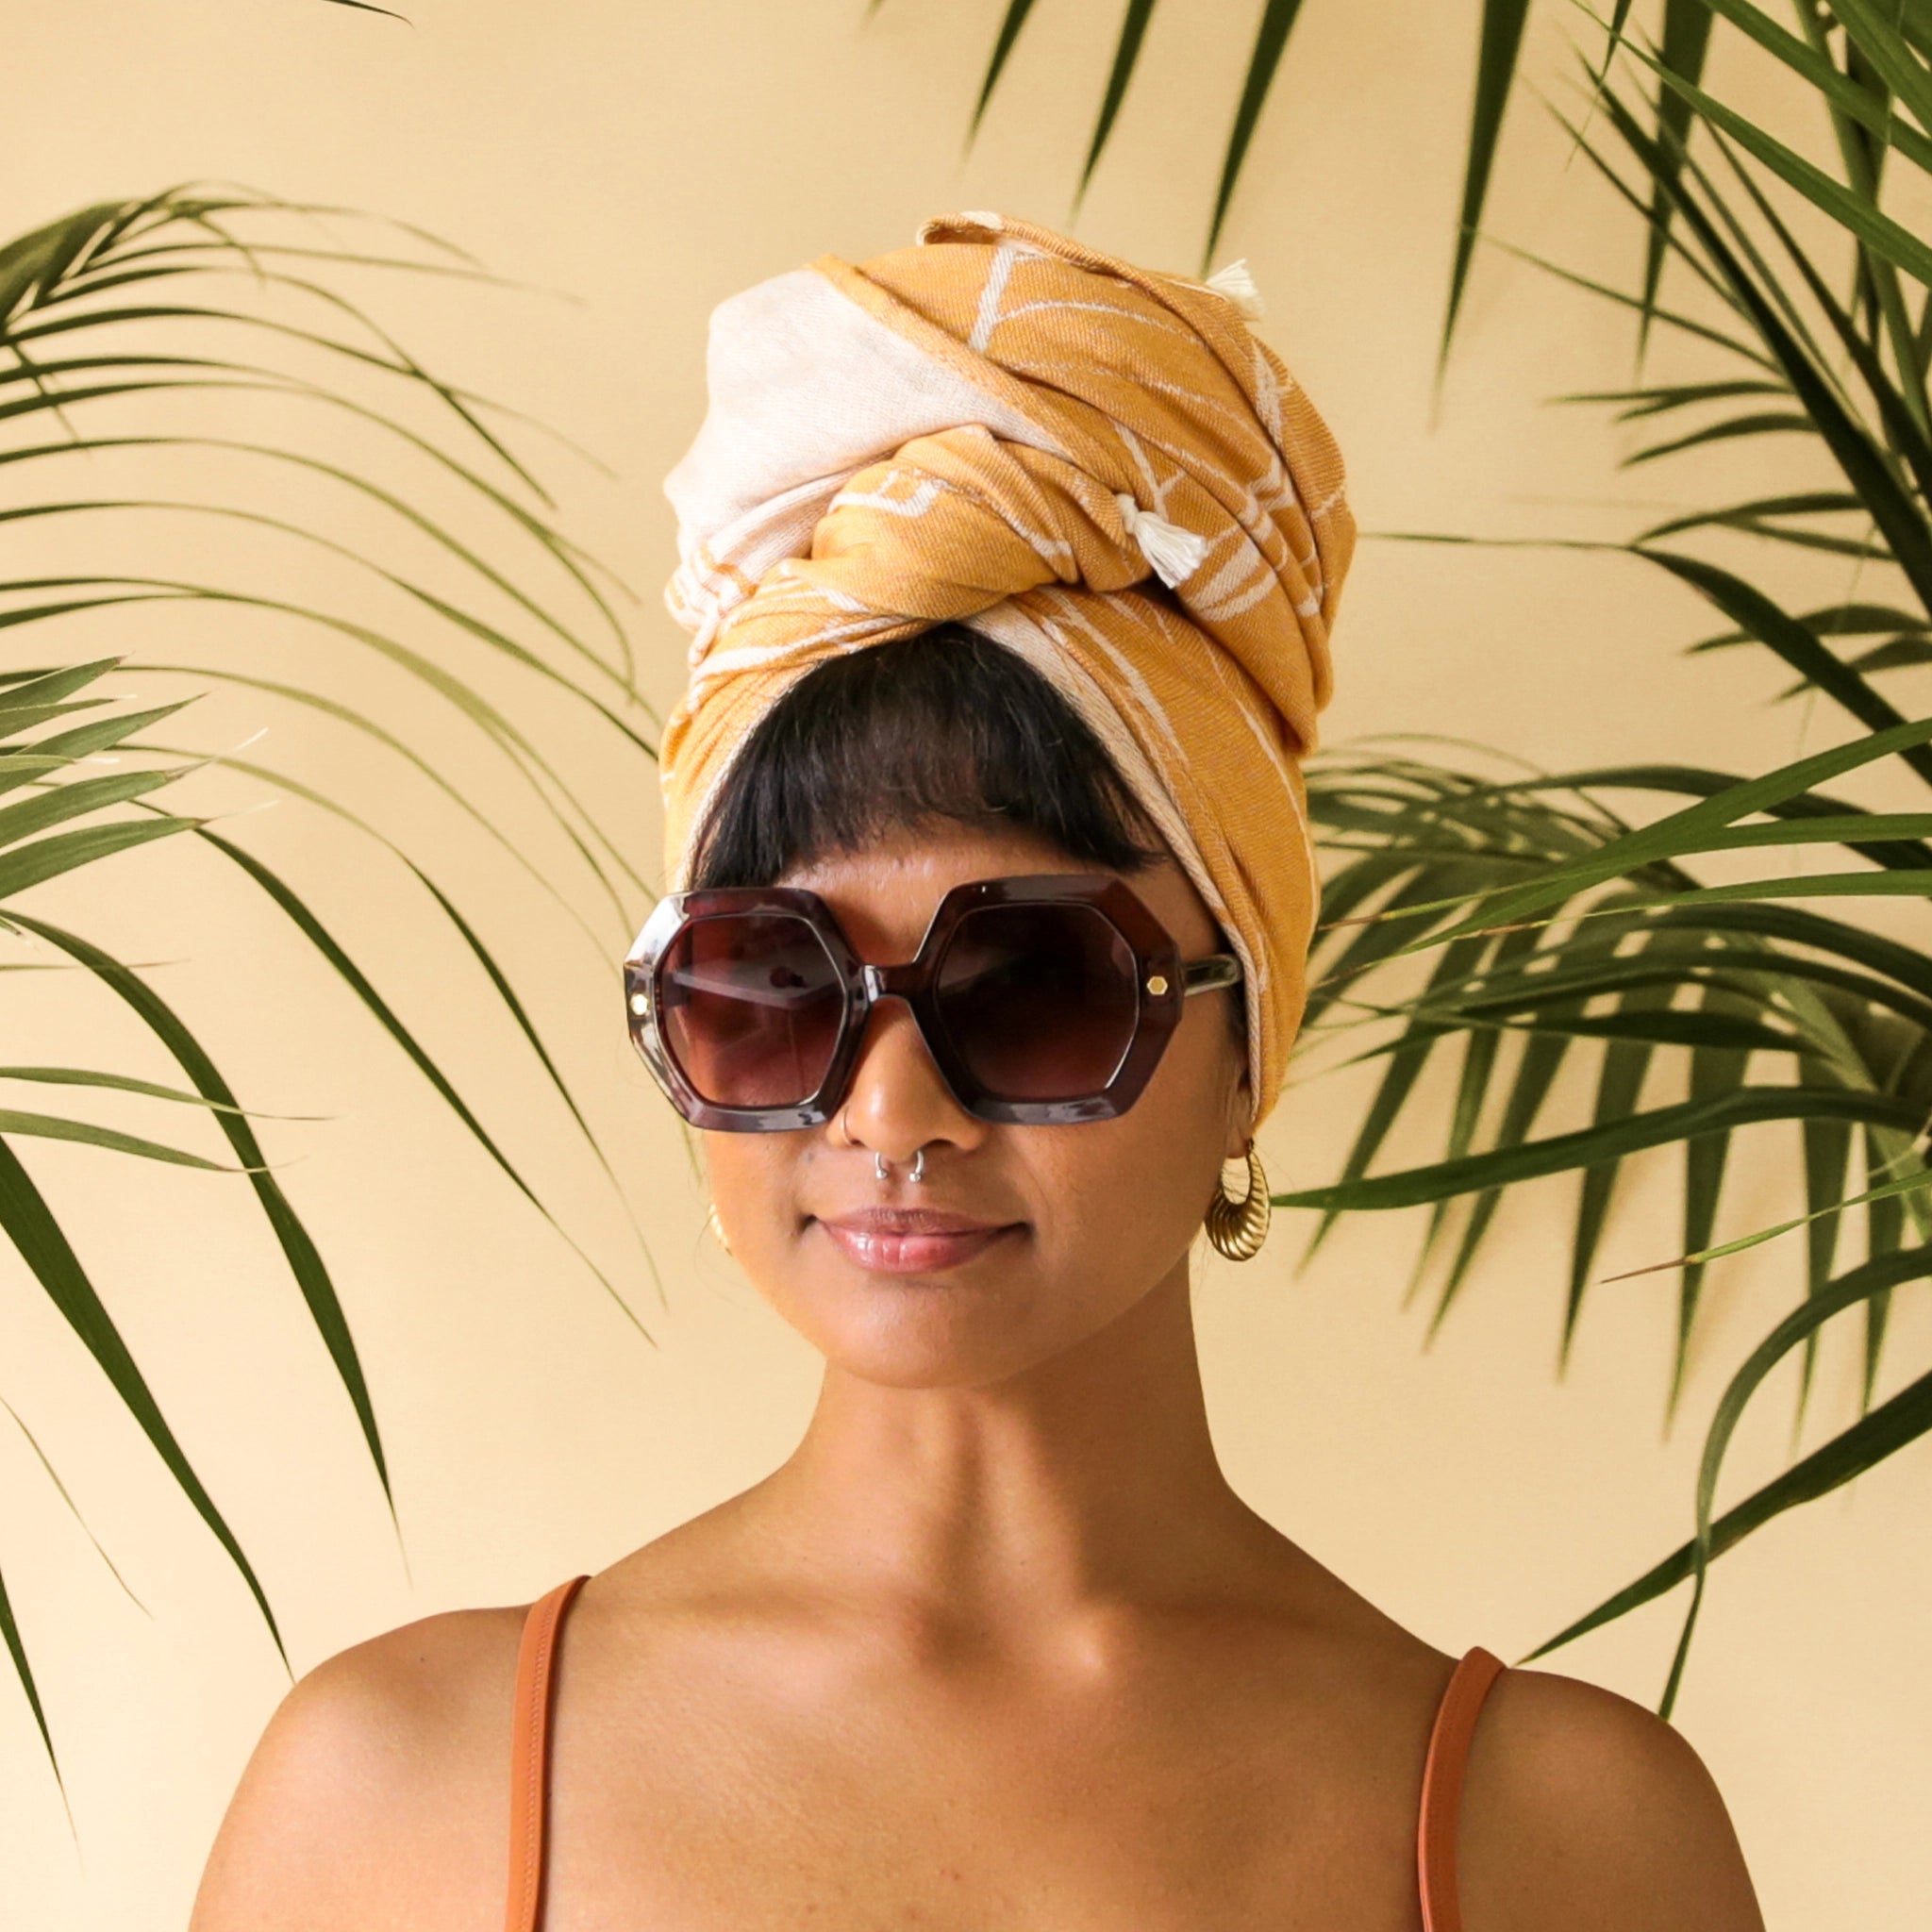 On a peachy background is modeling wearing a pair of hexagon shaped tortoise sunglasses with brown lenses.